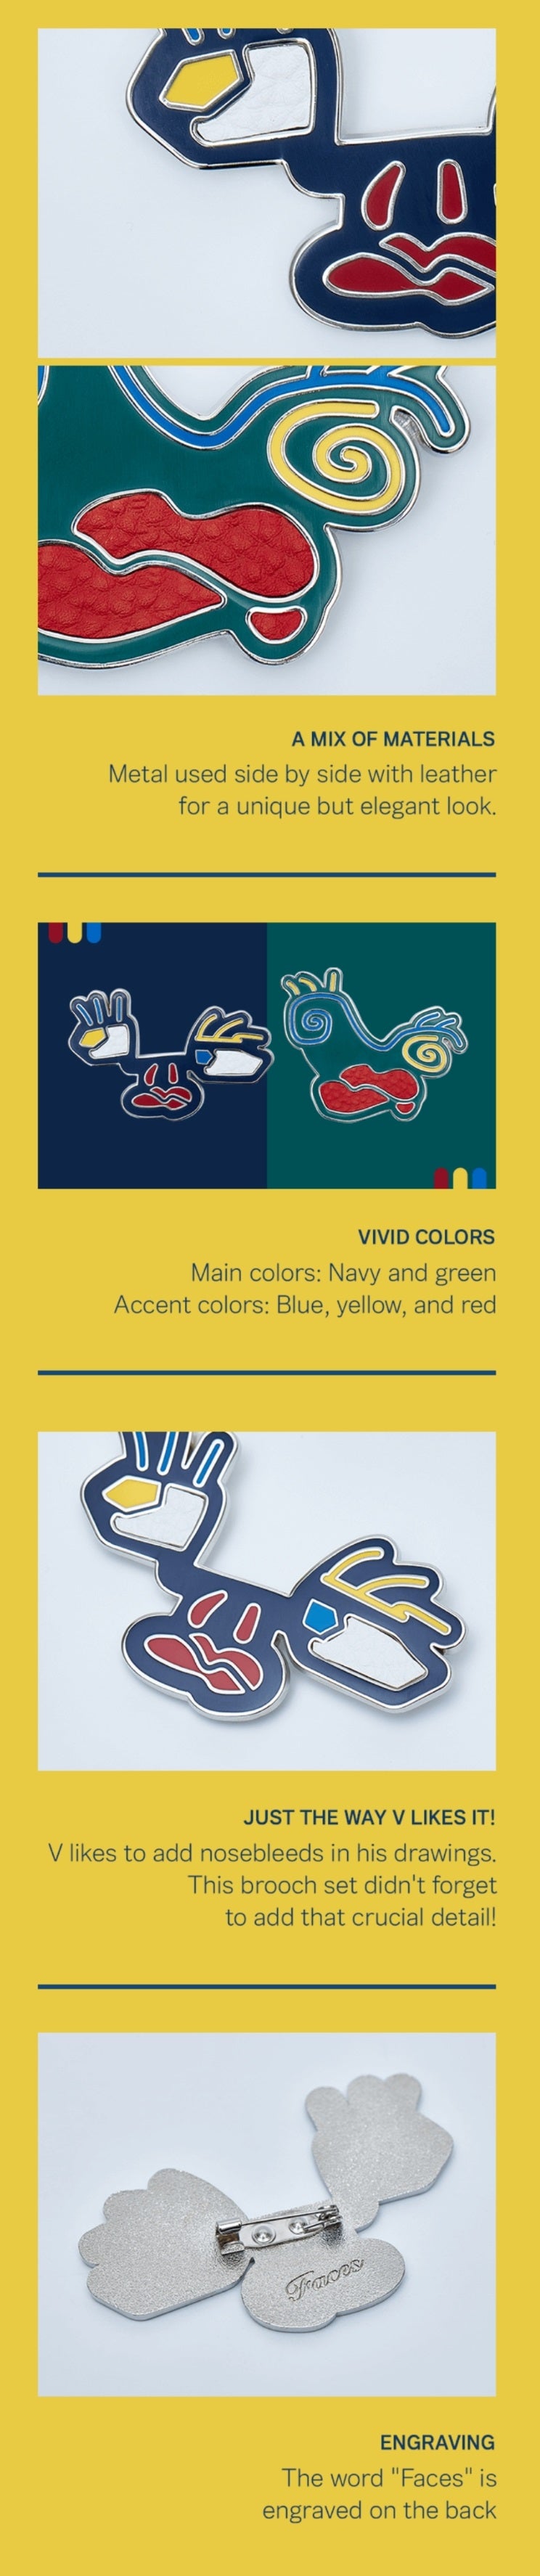 4TH PRE-ORDER] ARTIST-MADE COLLECTION BY BTS V - COKODIVE